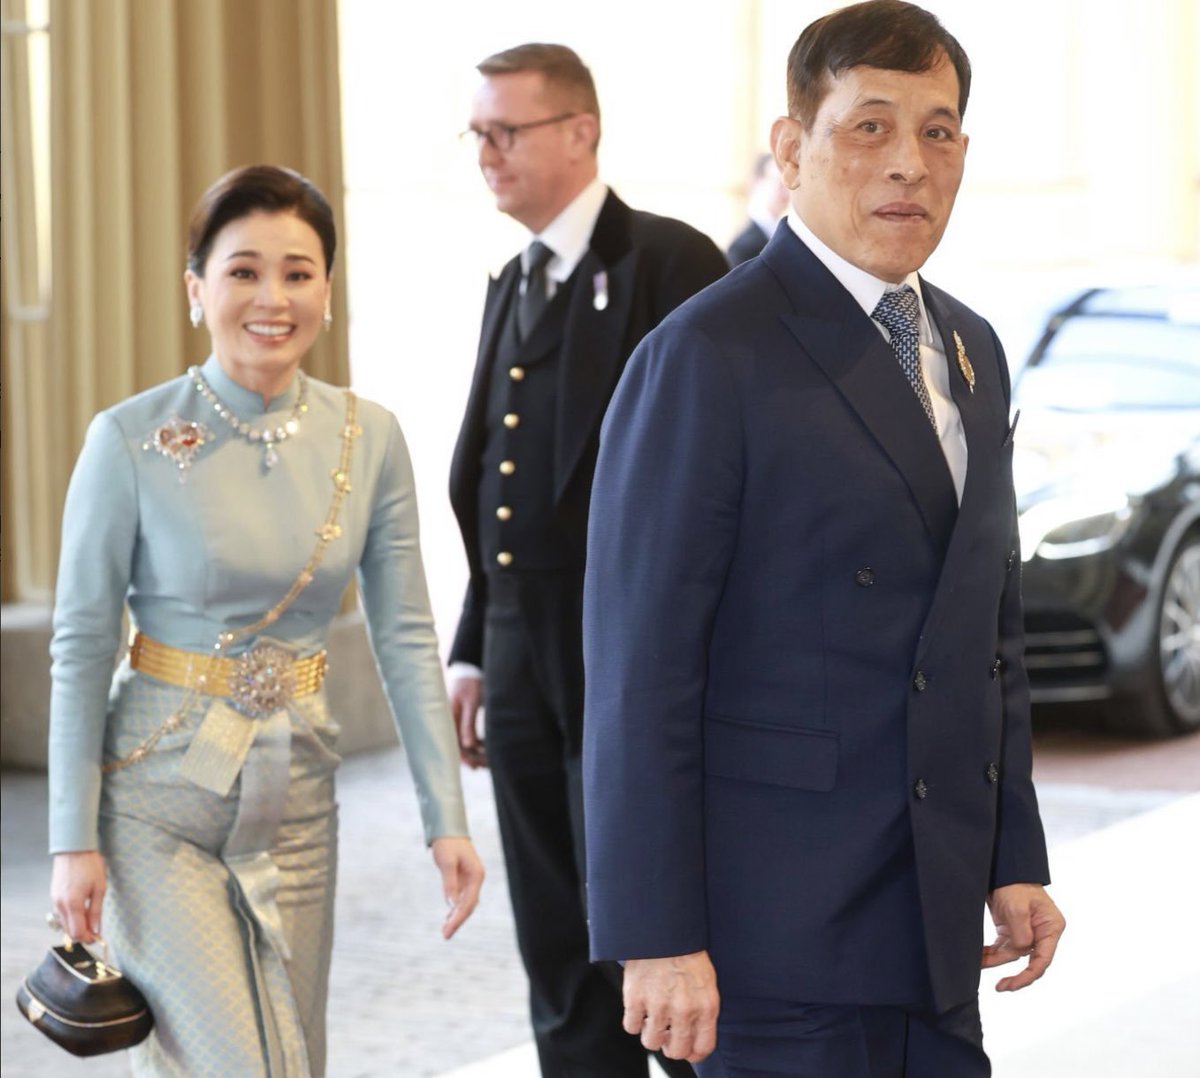 Queen Suthida and King Vajiralongkorn of Thailand have arrived at  the Coronation Reception for overseas guests at Buckingham Palace.
#KingCharleslll  #Coronation 

📸 Chris Jackson/Getty Images